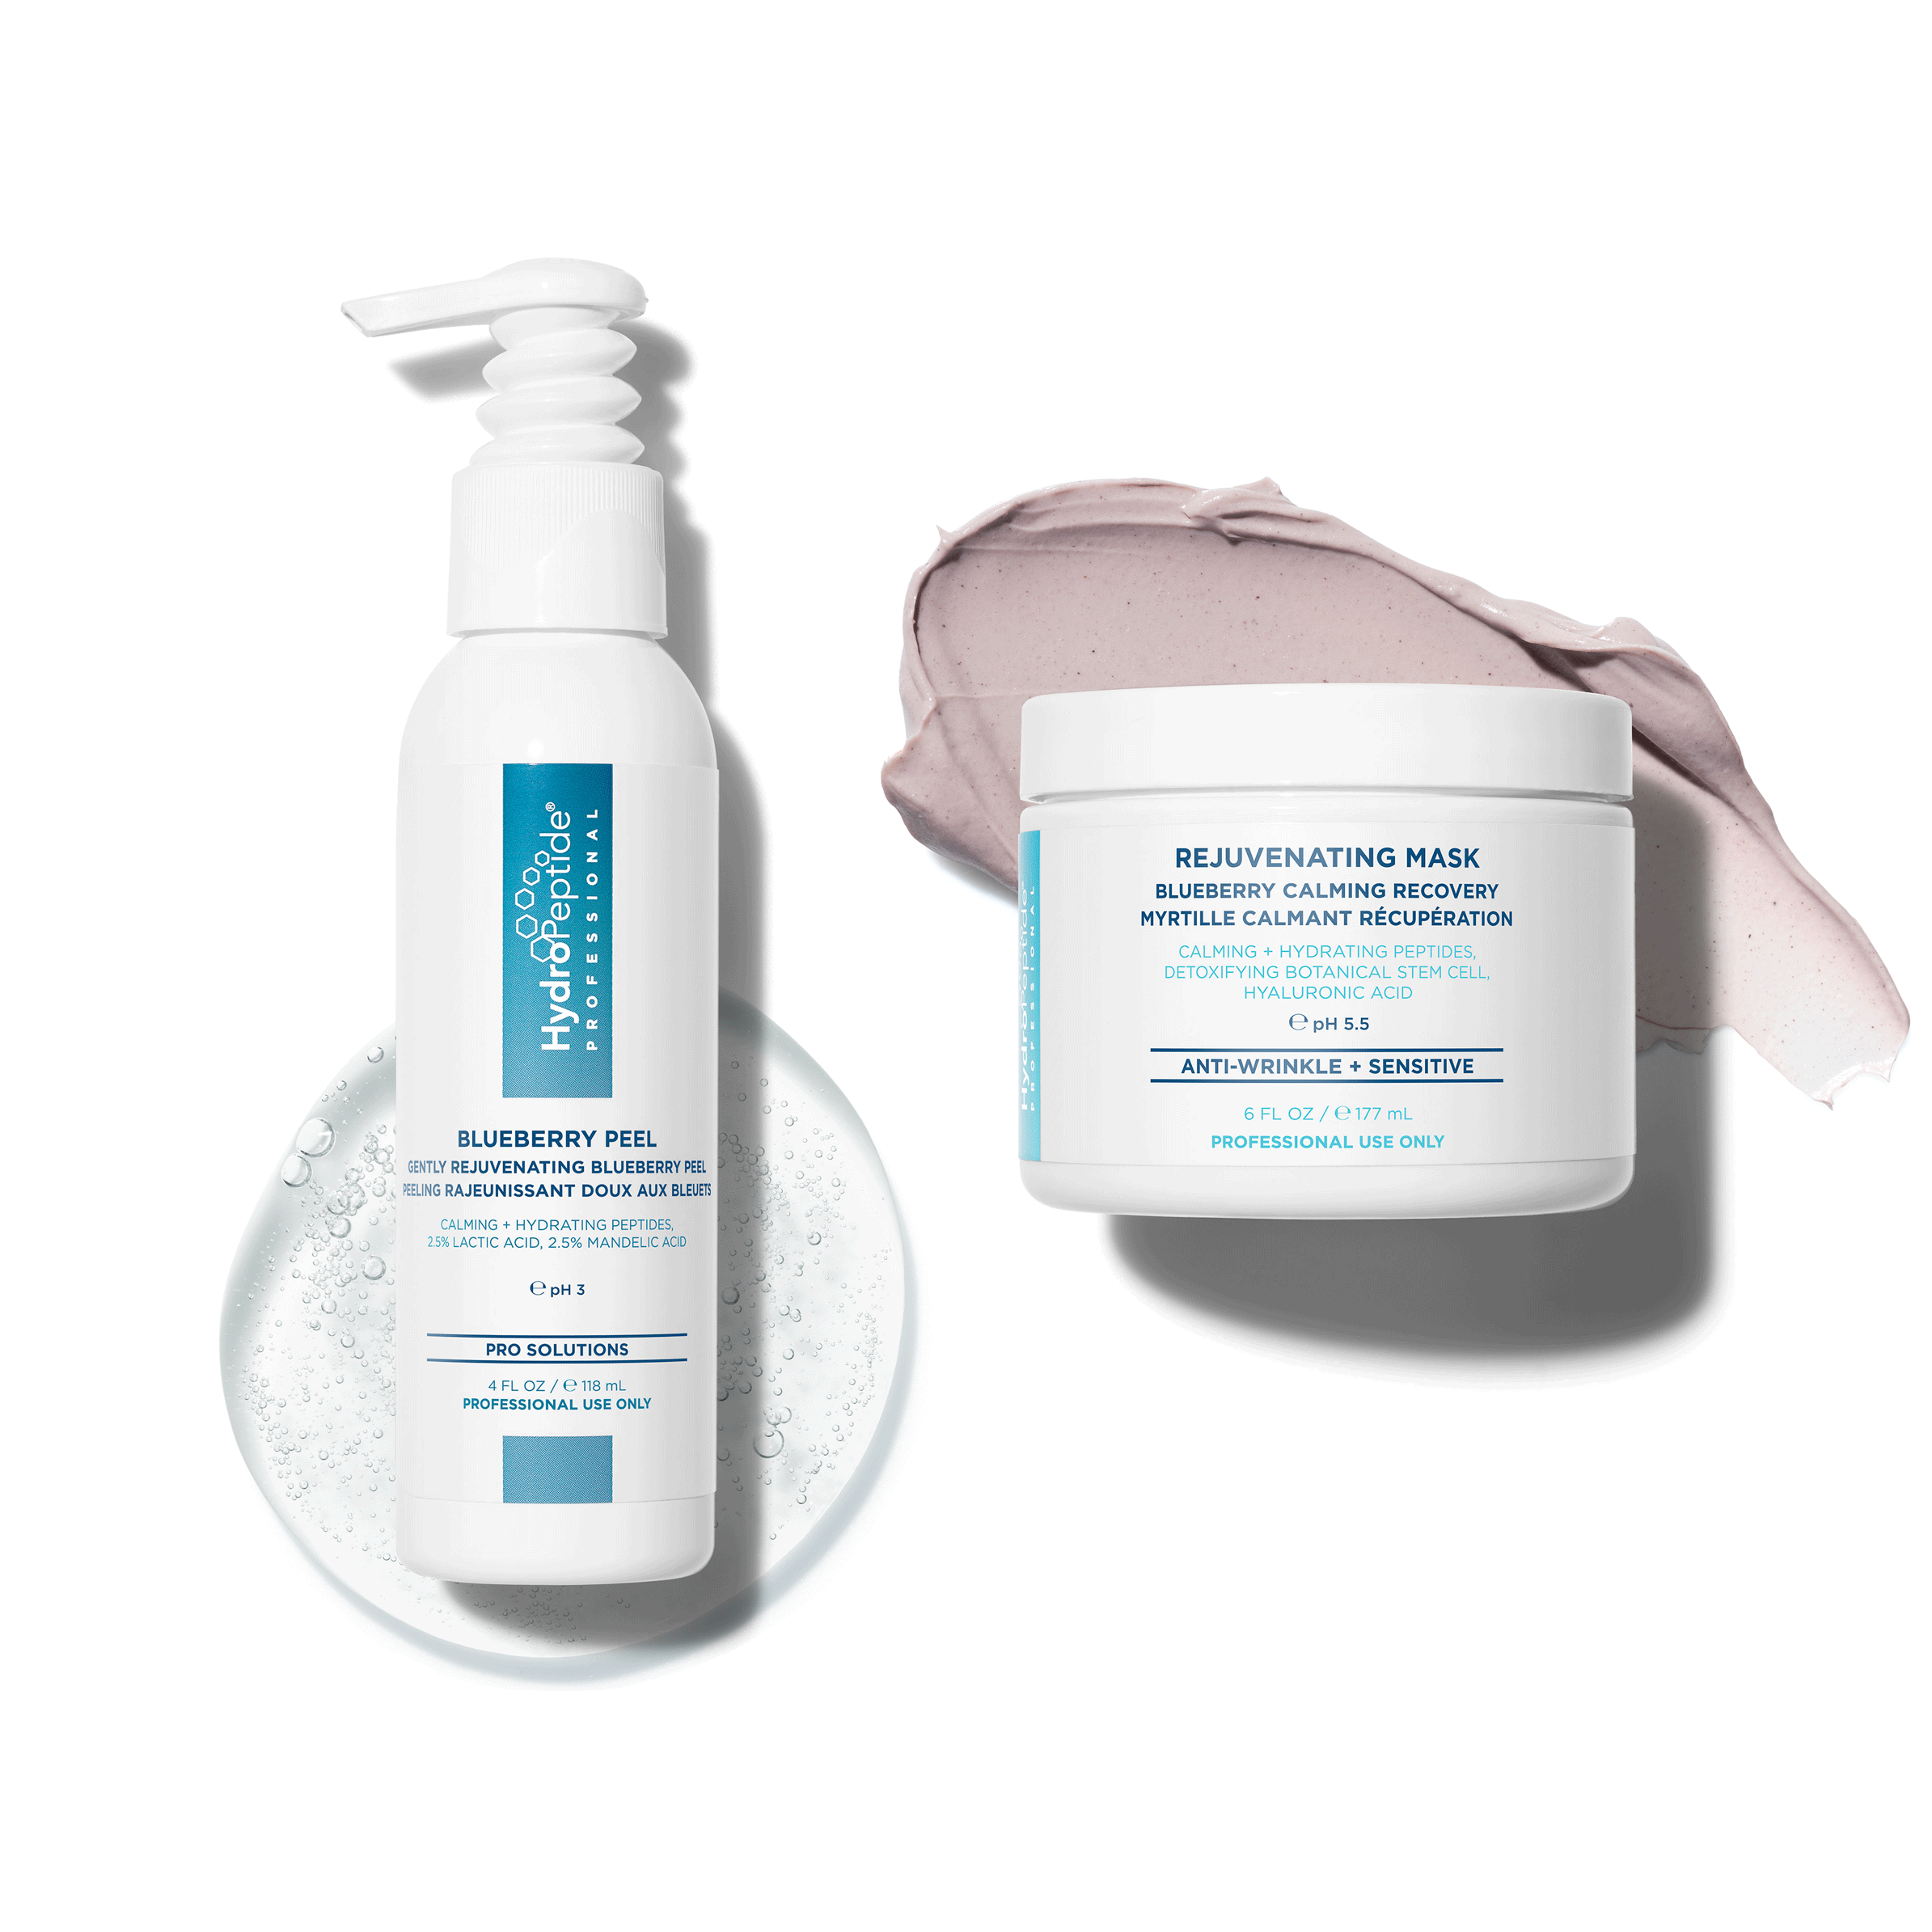 HydroPeptide Calm & Soothe Professional Peel + Mask Bundle